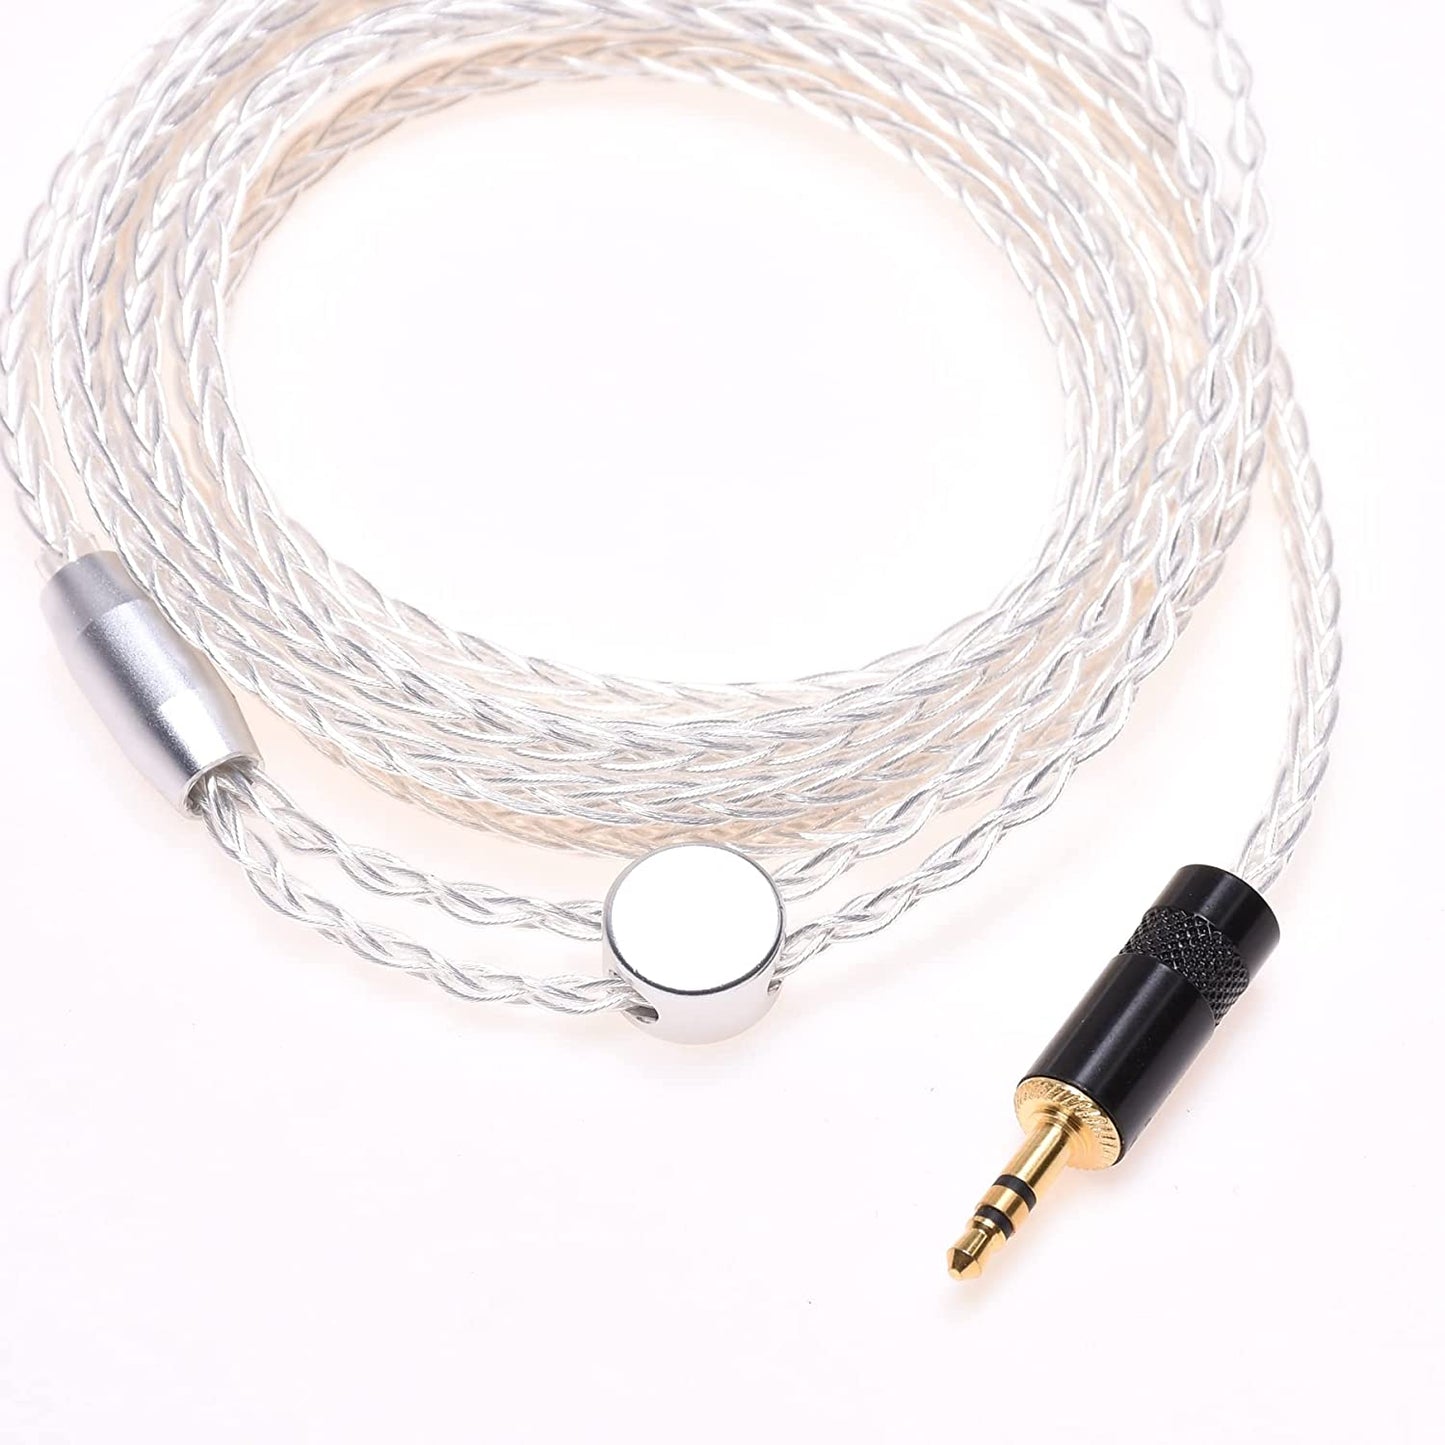 Silver Plated Headphone Upgrade Cable for ZMF Eikon Auteur Audeze LCD-2 LCD-3 LCD-4 LCD-X LCD-XC